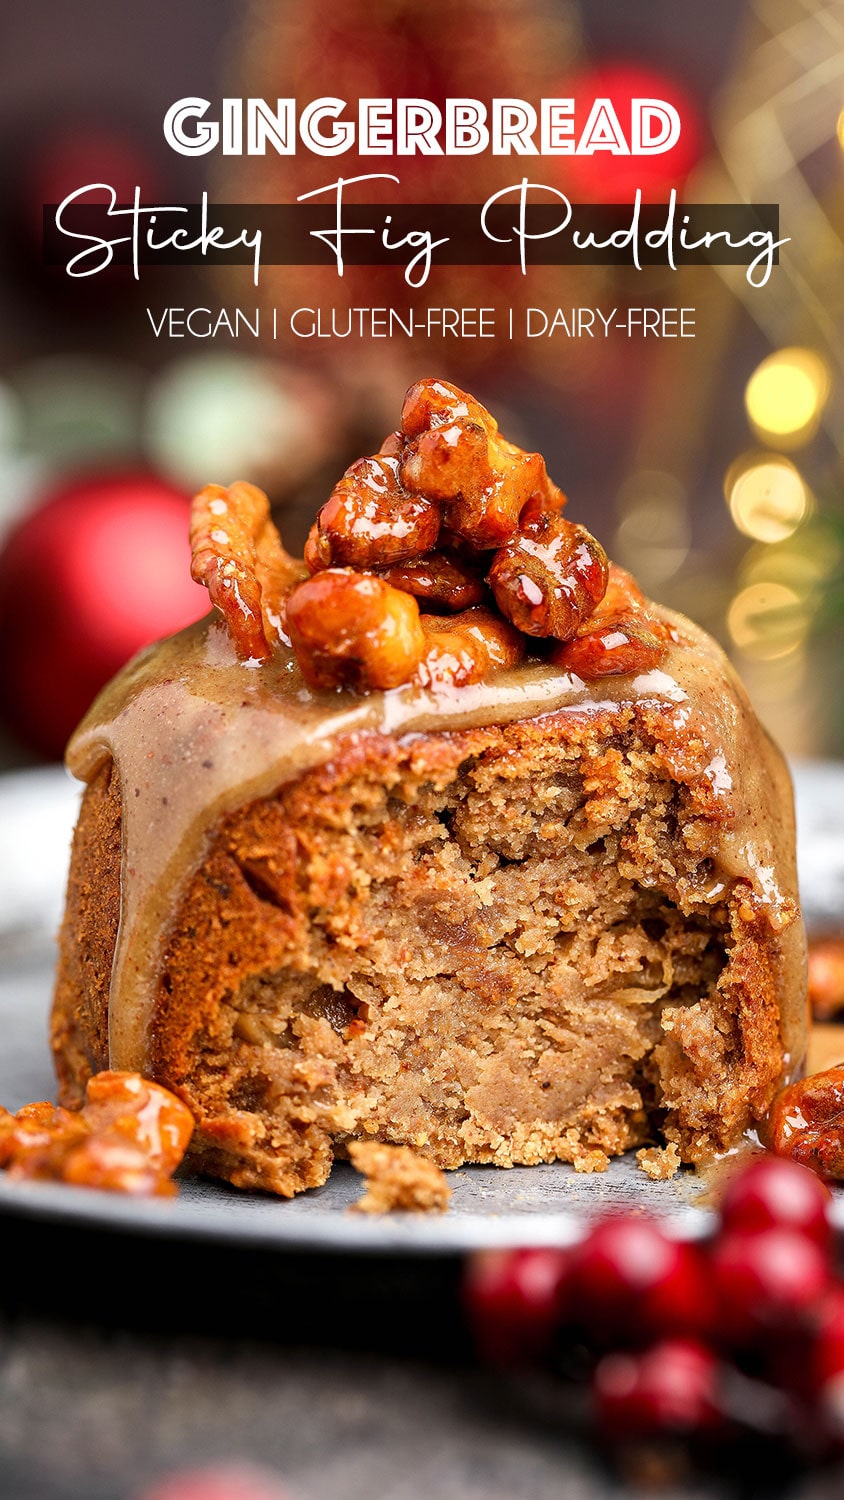 Gingerbread Sticky Fig Puddings